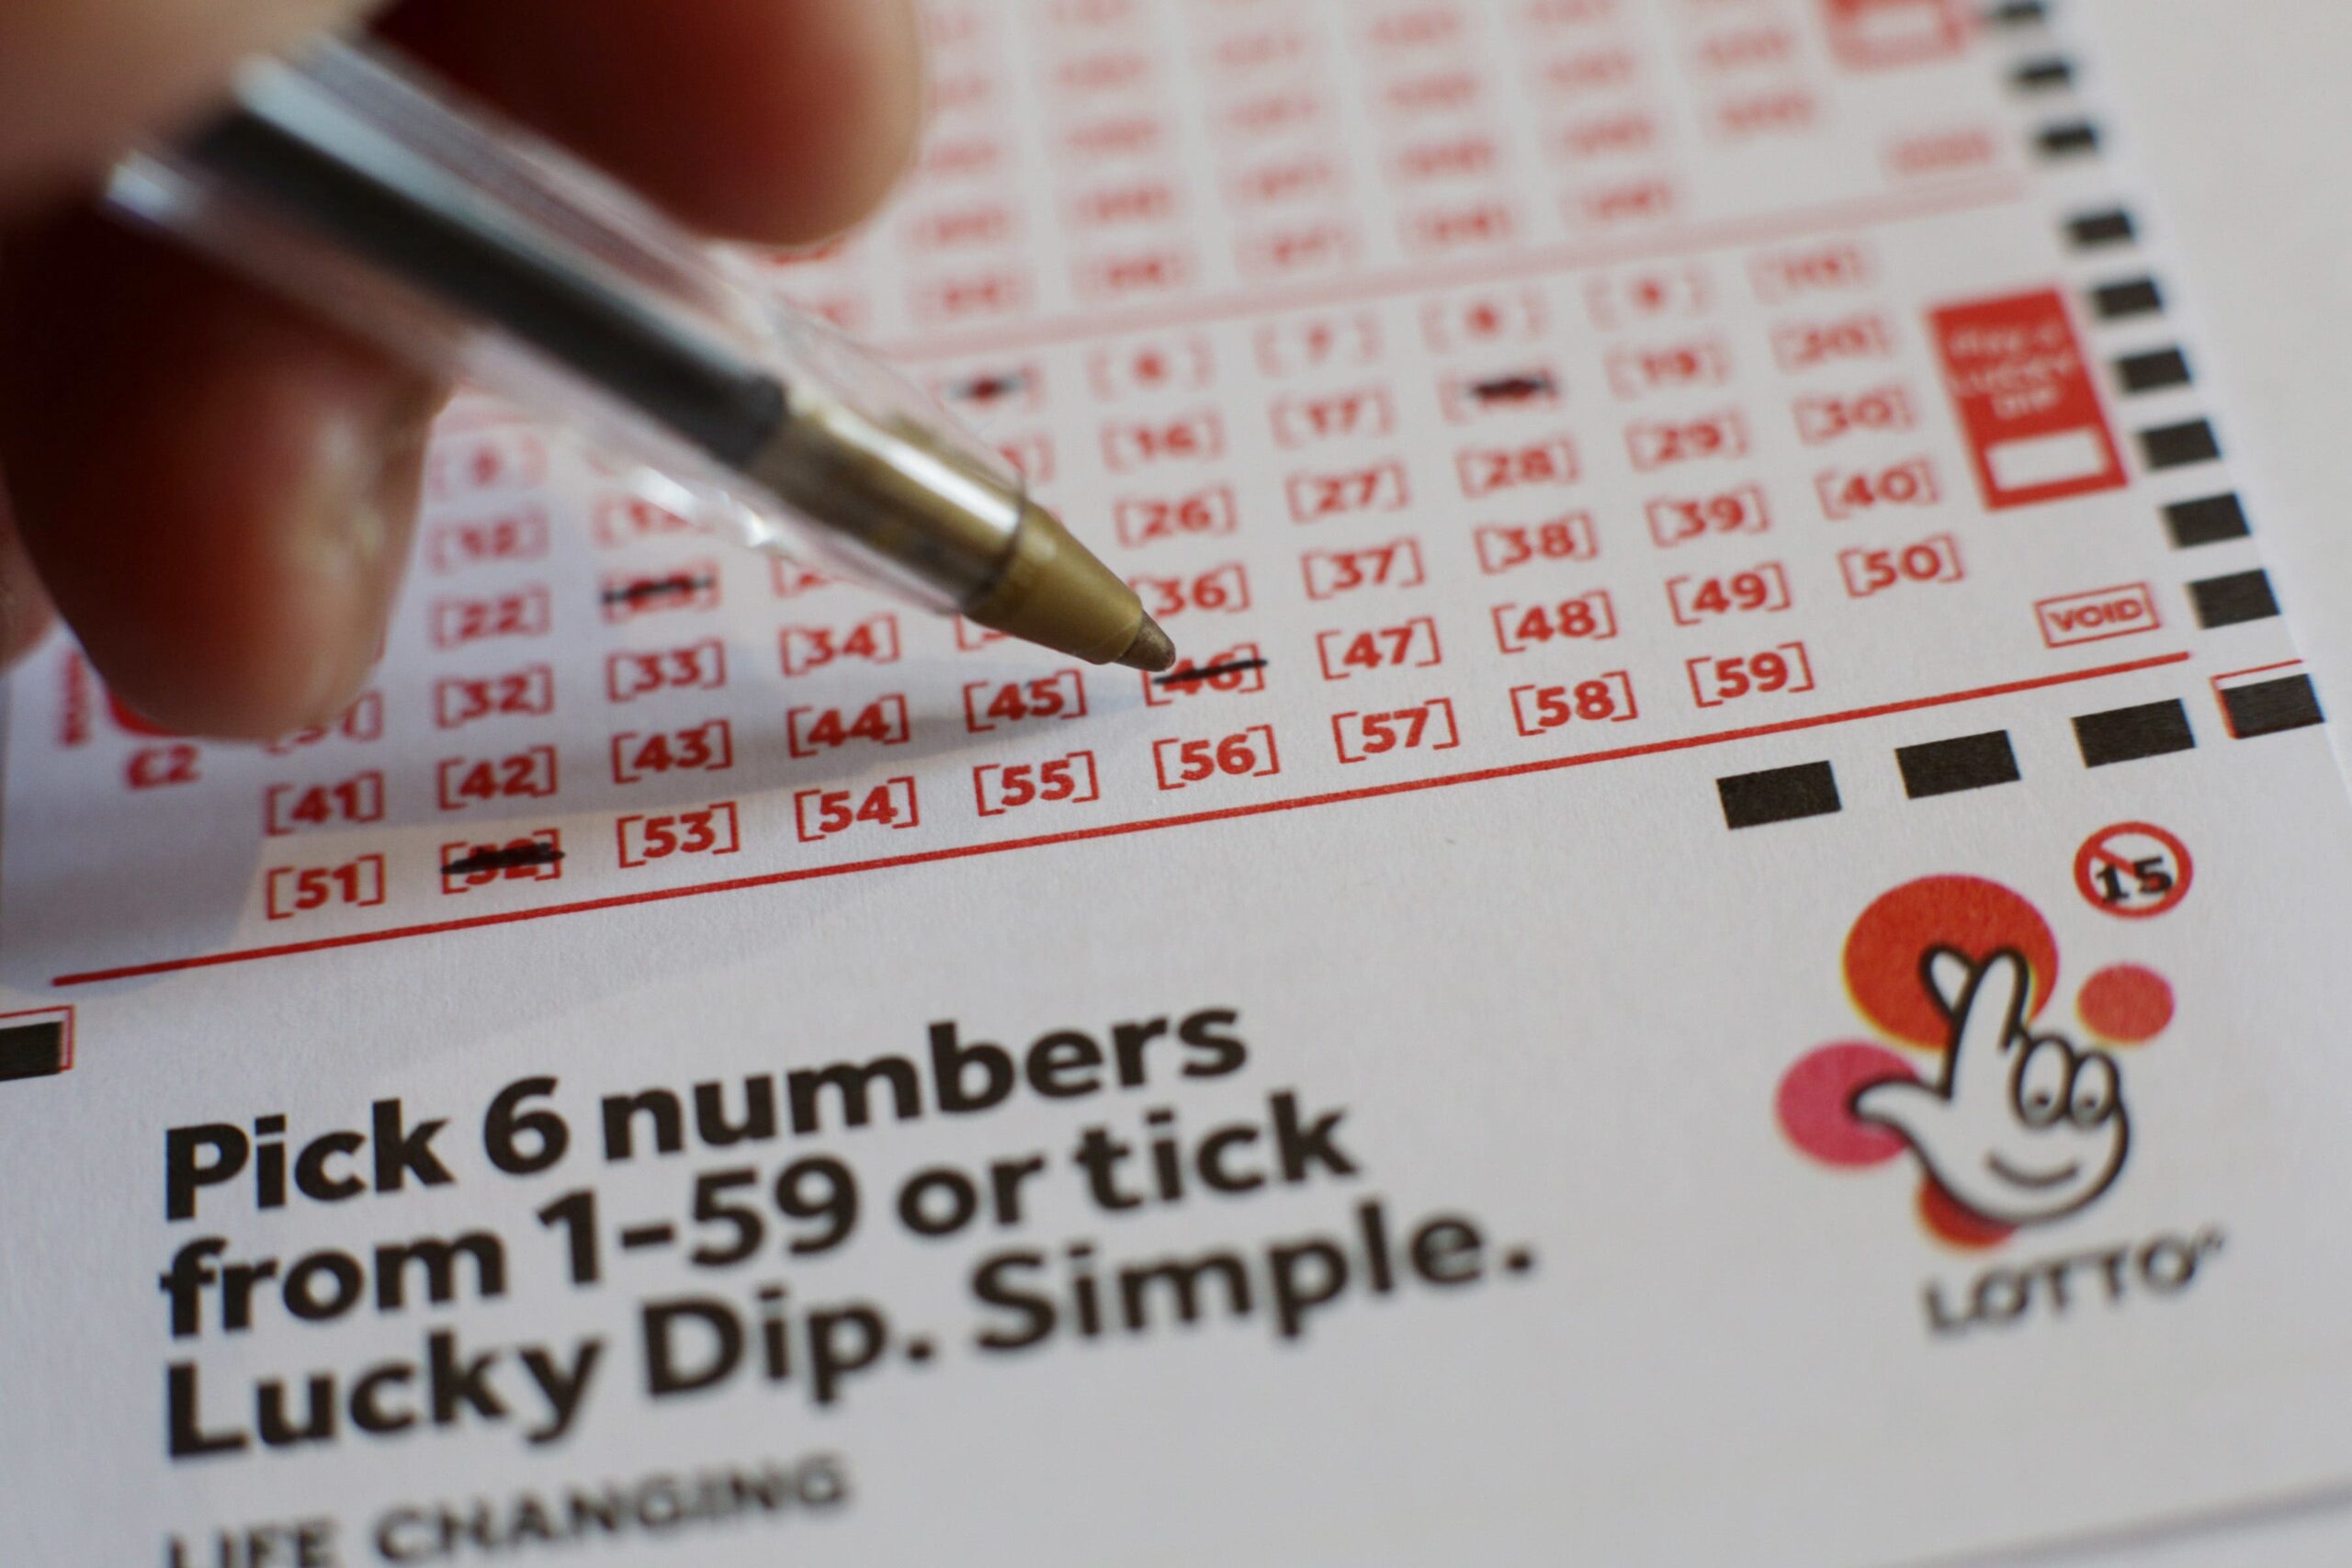 ‘Technical issue’ blamed for lottery dispute as woman claims £10 prize should be £1 million